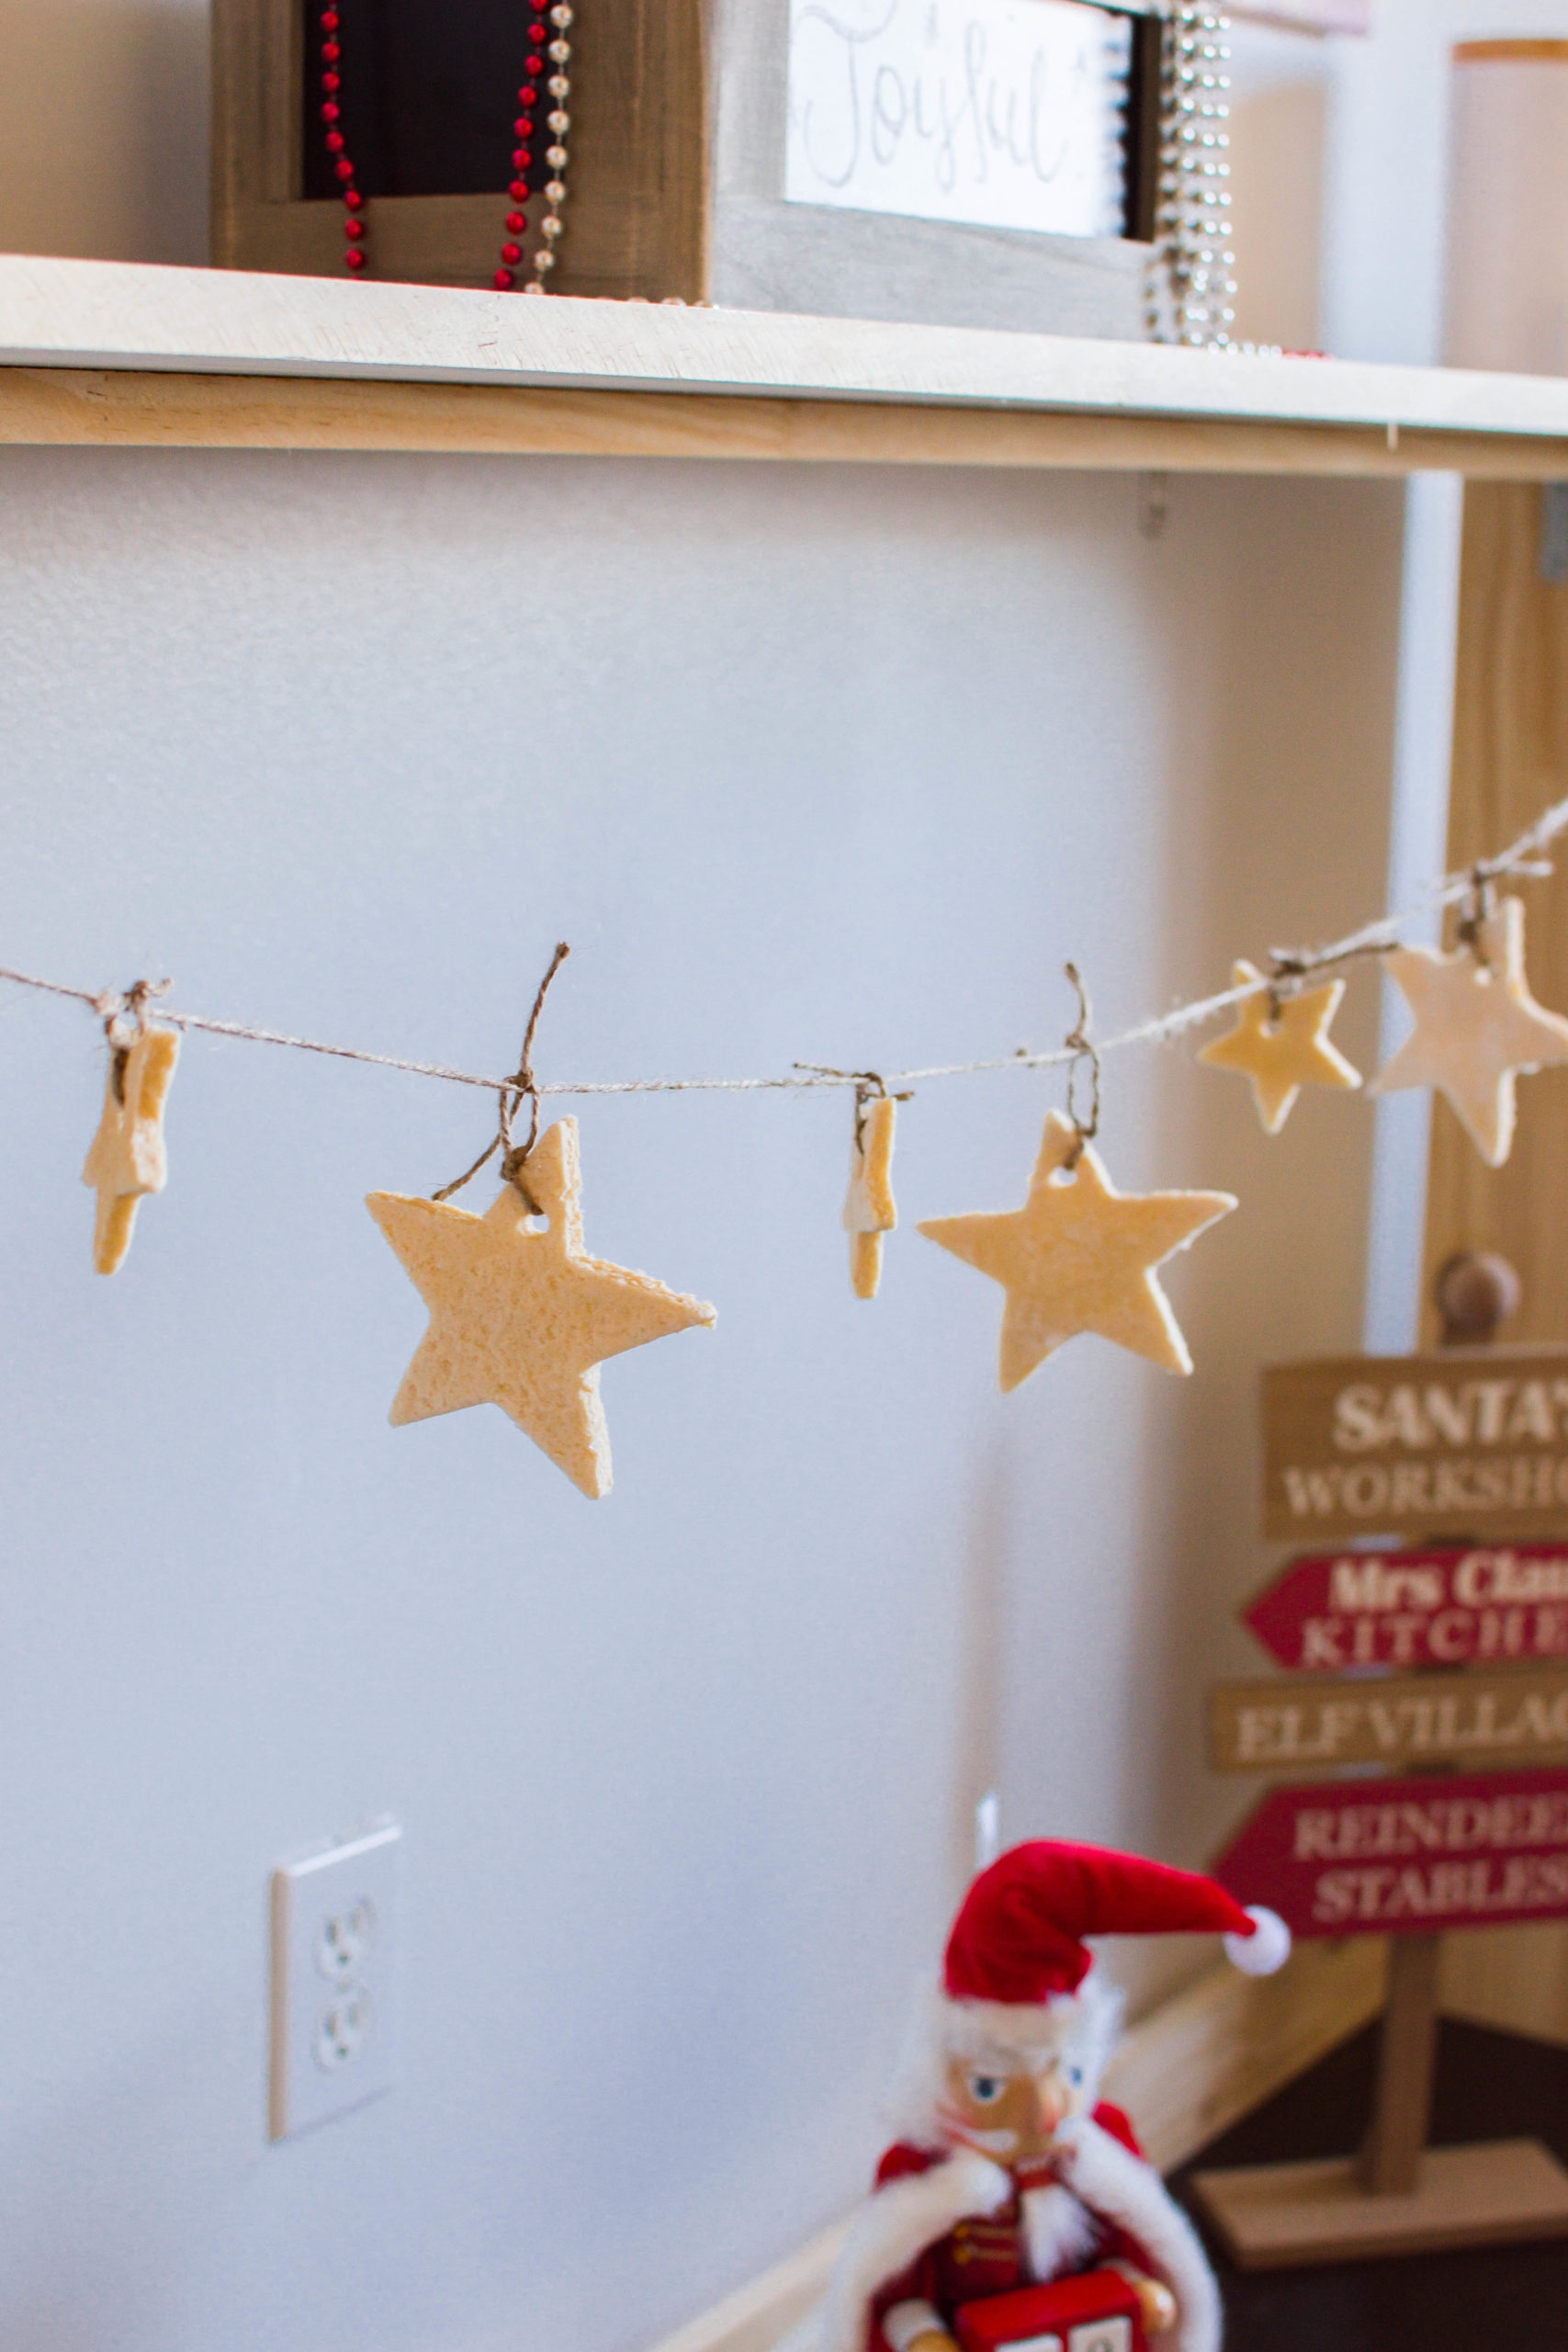 This Christmas Garland is made up of jute cord and our easy salt dough recipe. Such a cute holiday project to make with your kiddos this season!